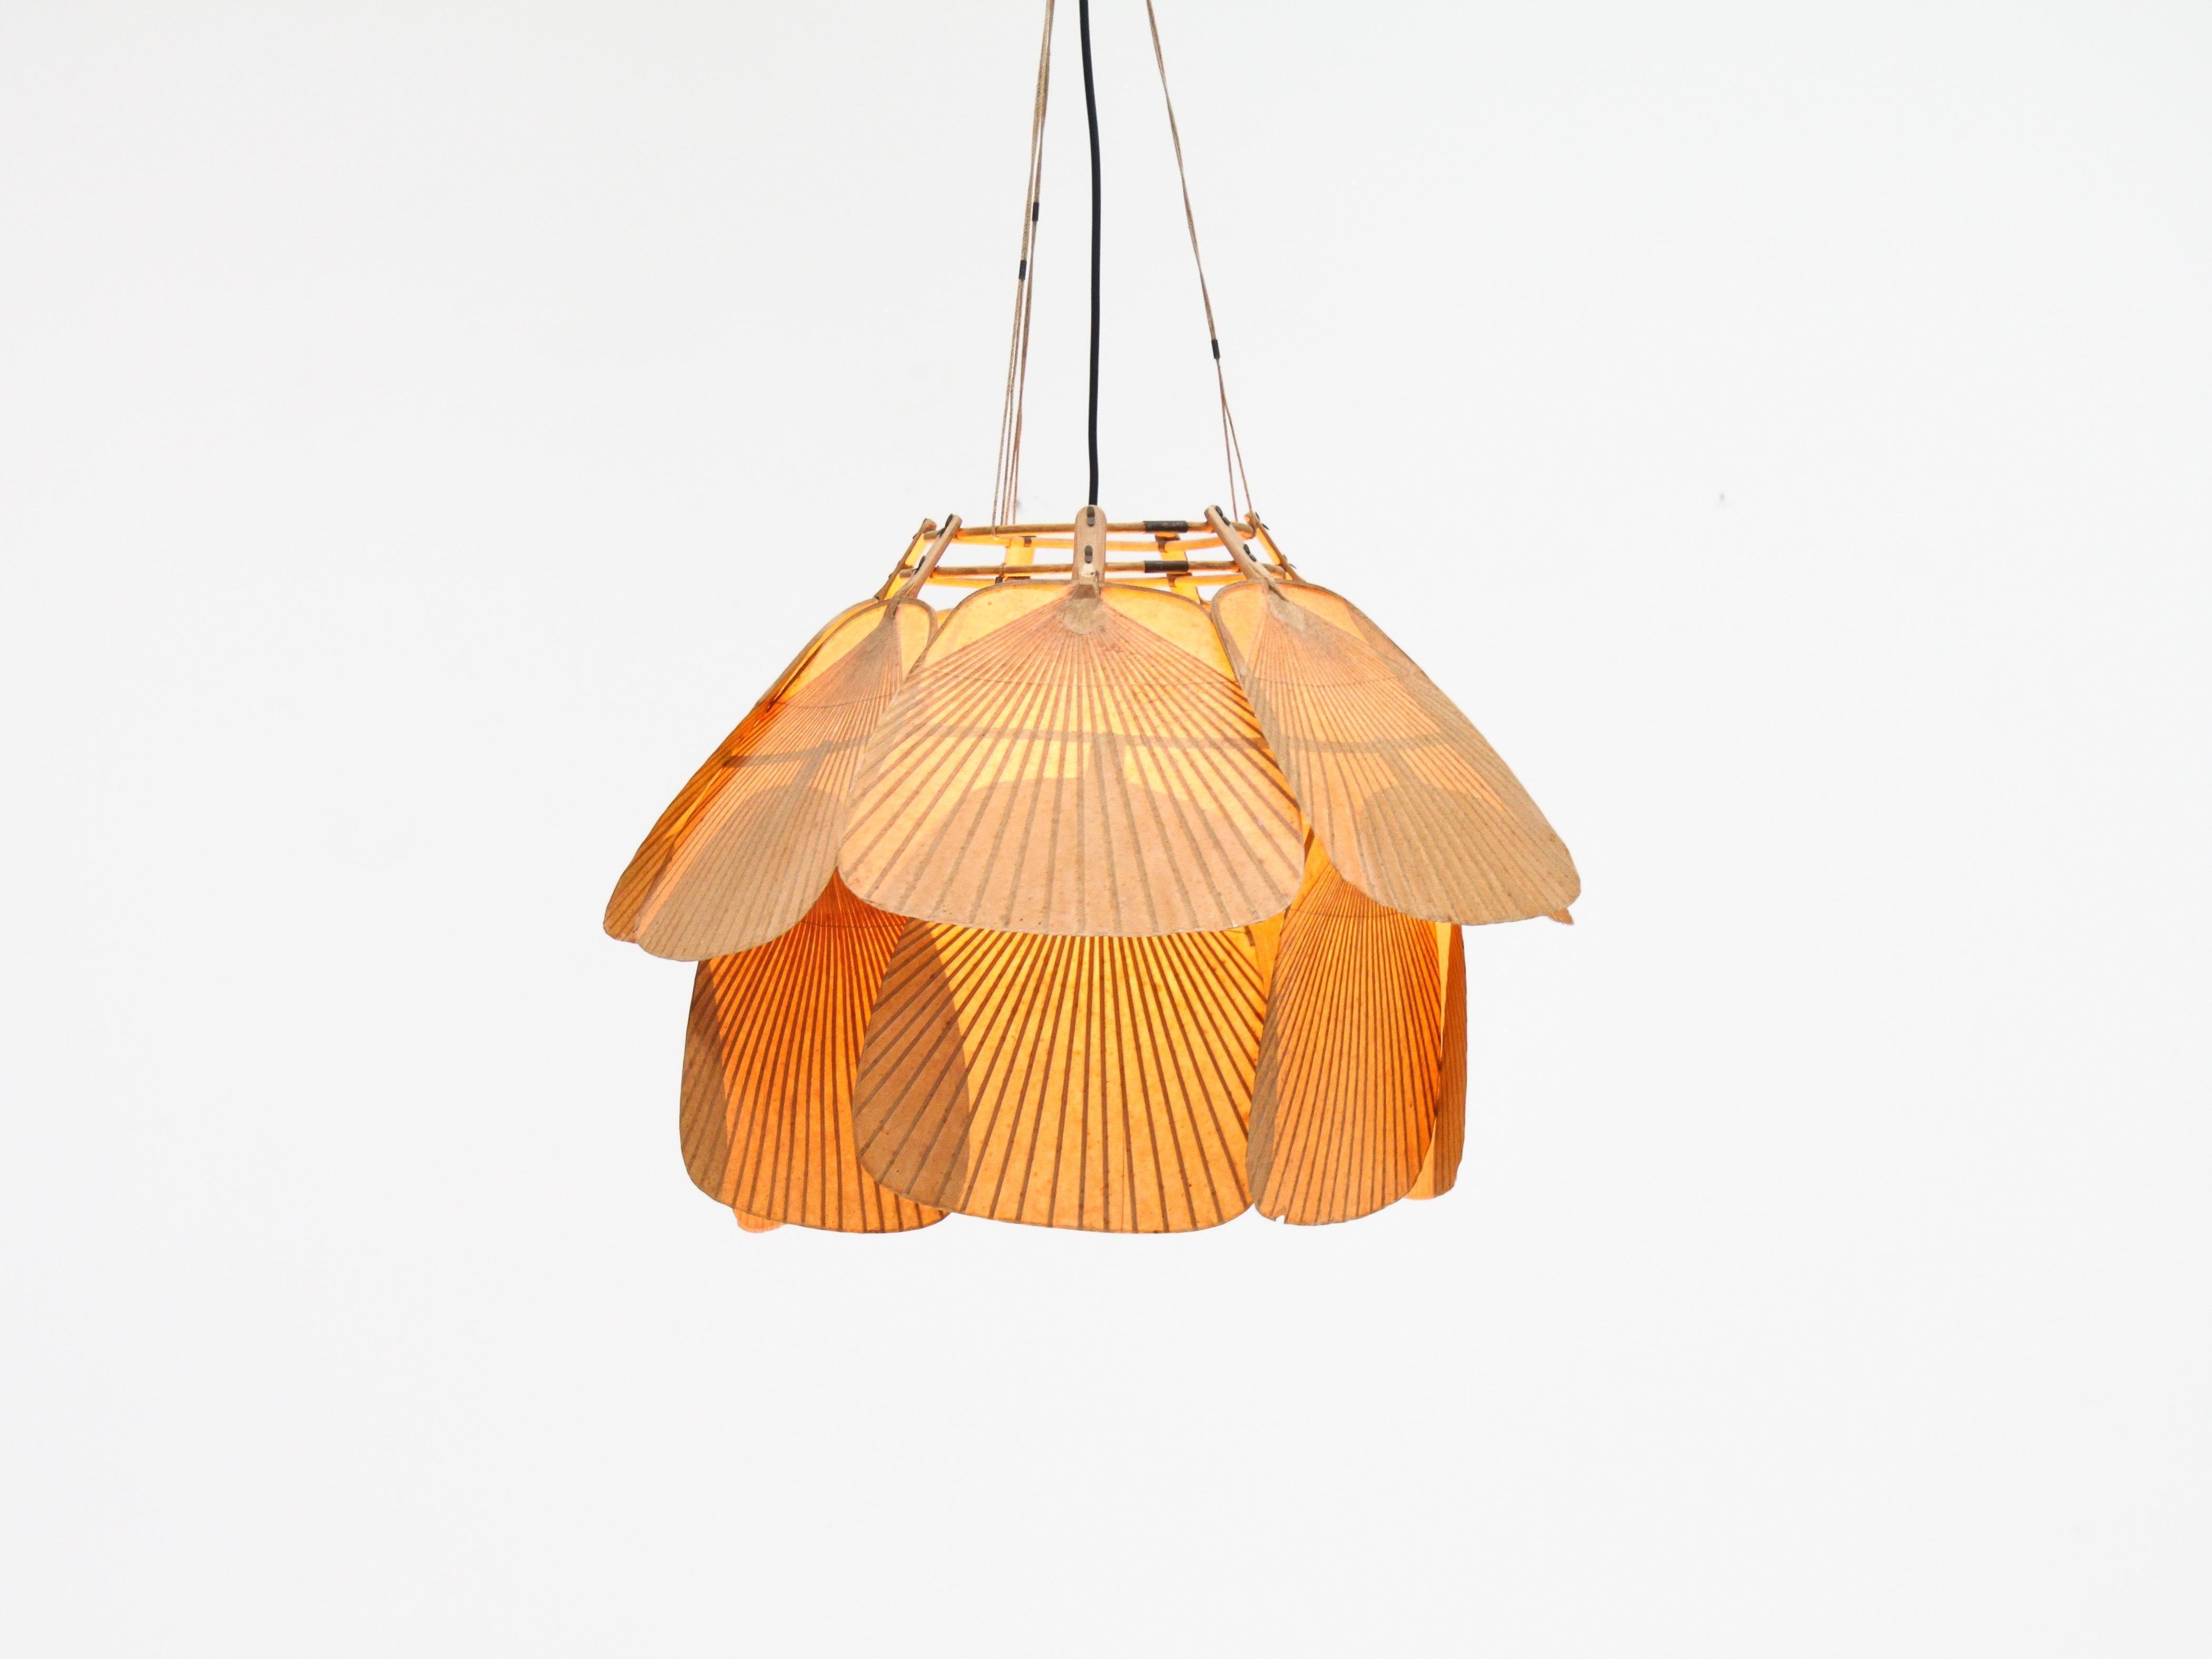 A wonderful and rare large 14 fan ‘Uchiwa Ju-Yon’ bamboo and Japanese rice paper Chandelier by Ingo Maurer for M design, Germany, 1970s.

Ingo Maurer’s interest in paper for lampshades was linked with his interest in Japan. From 1973-1975 he